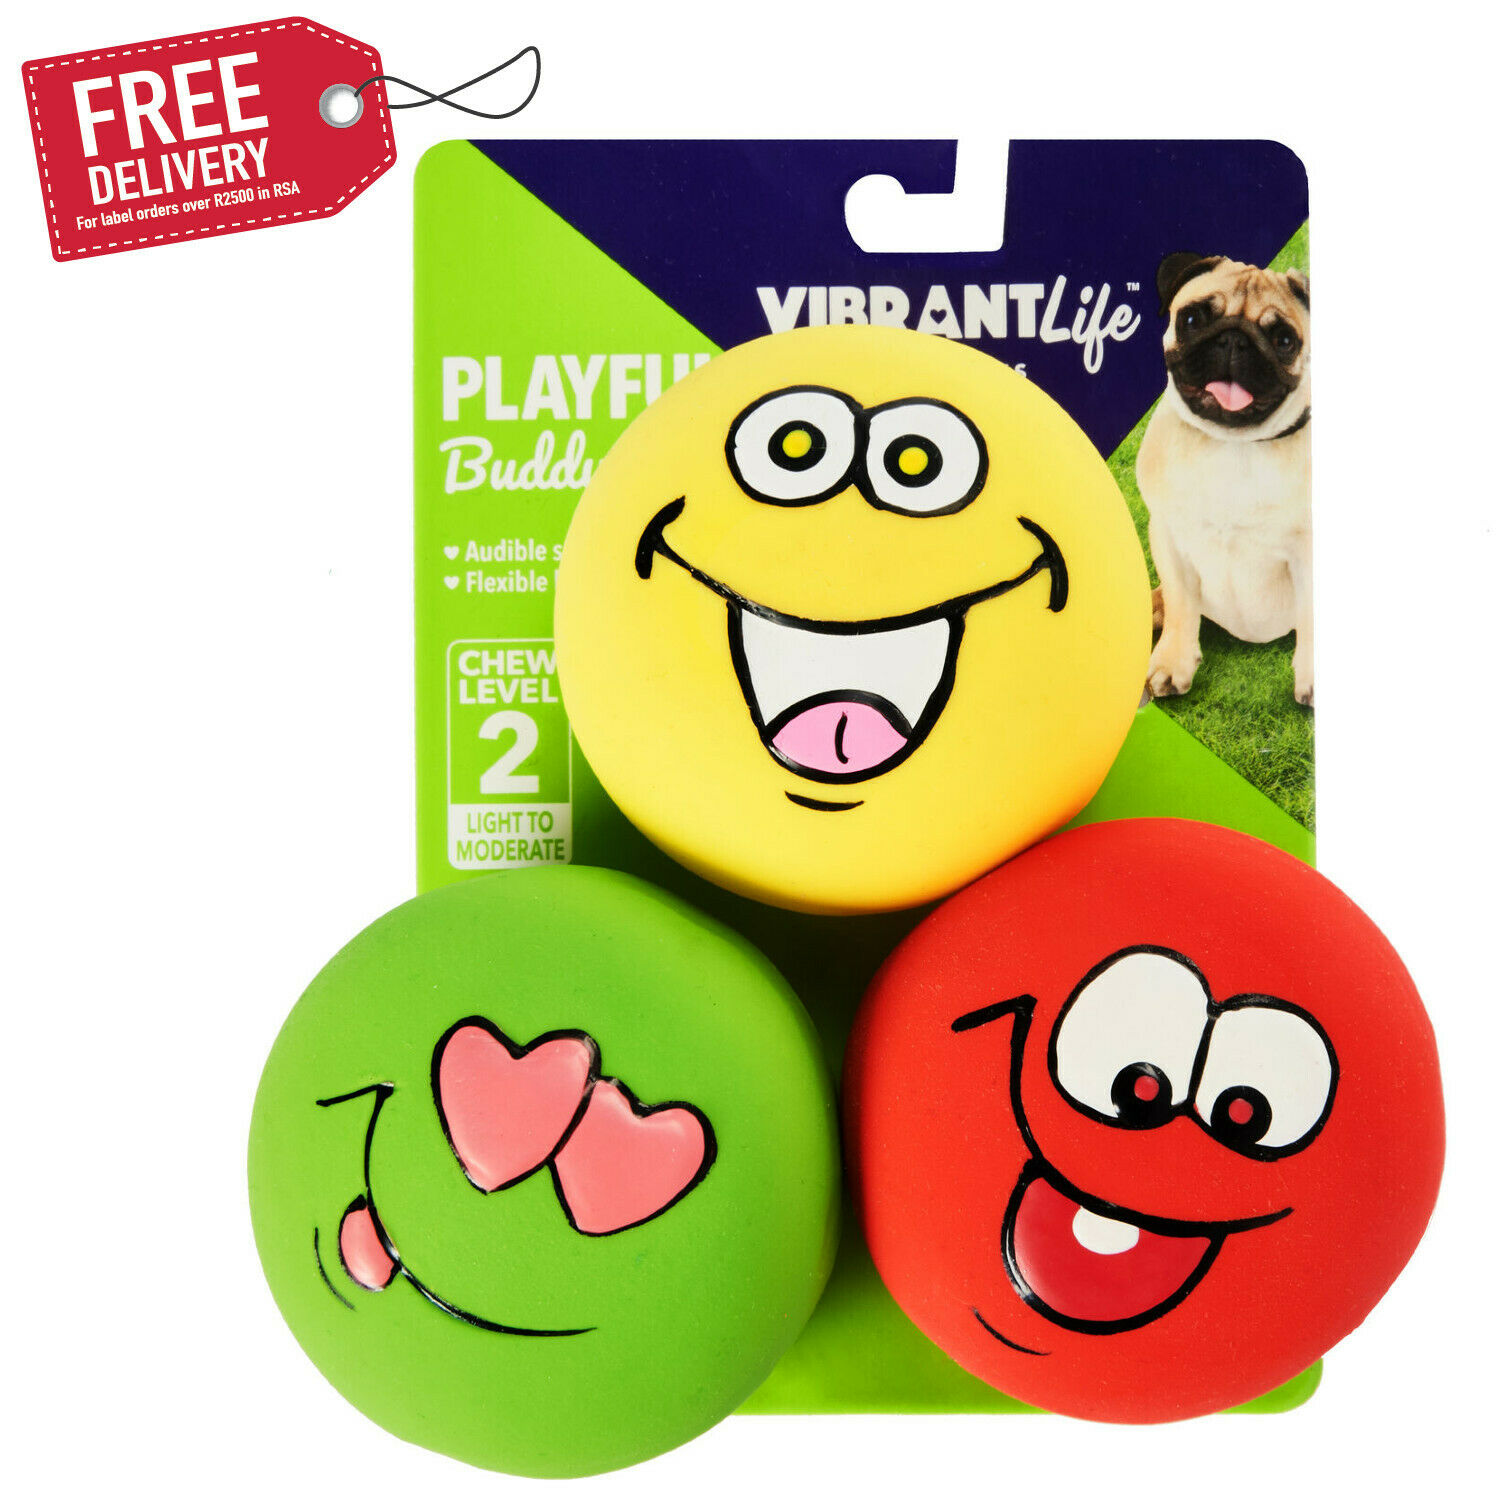 Vibrant Life Playful Buddy Emoticon Best Dog Chew Toy Chew Level 2, 3 Count New